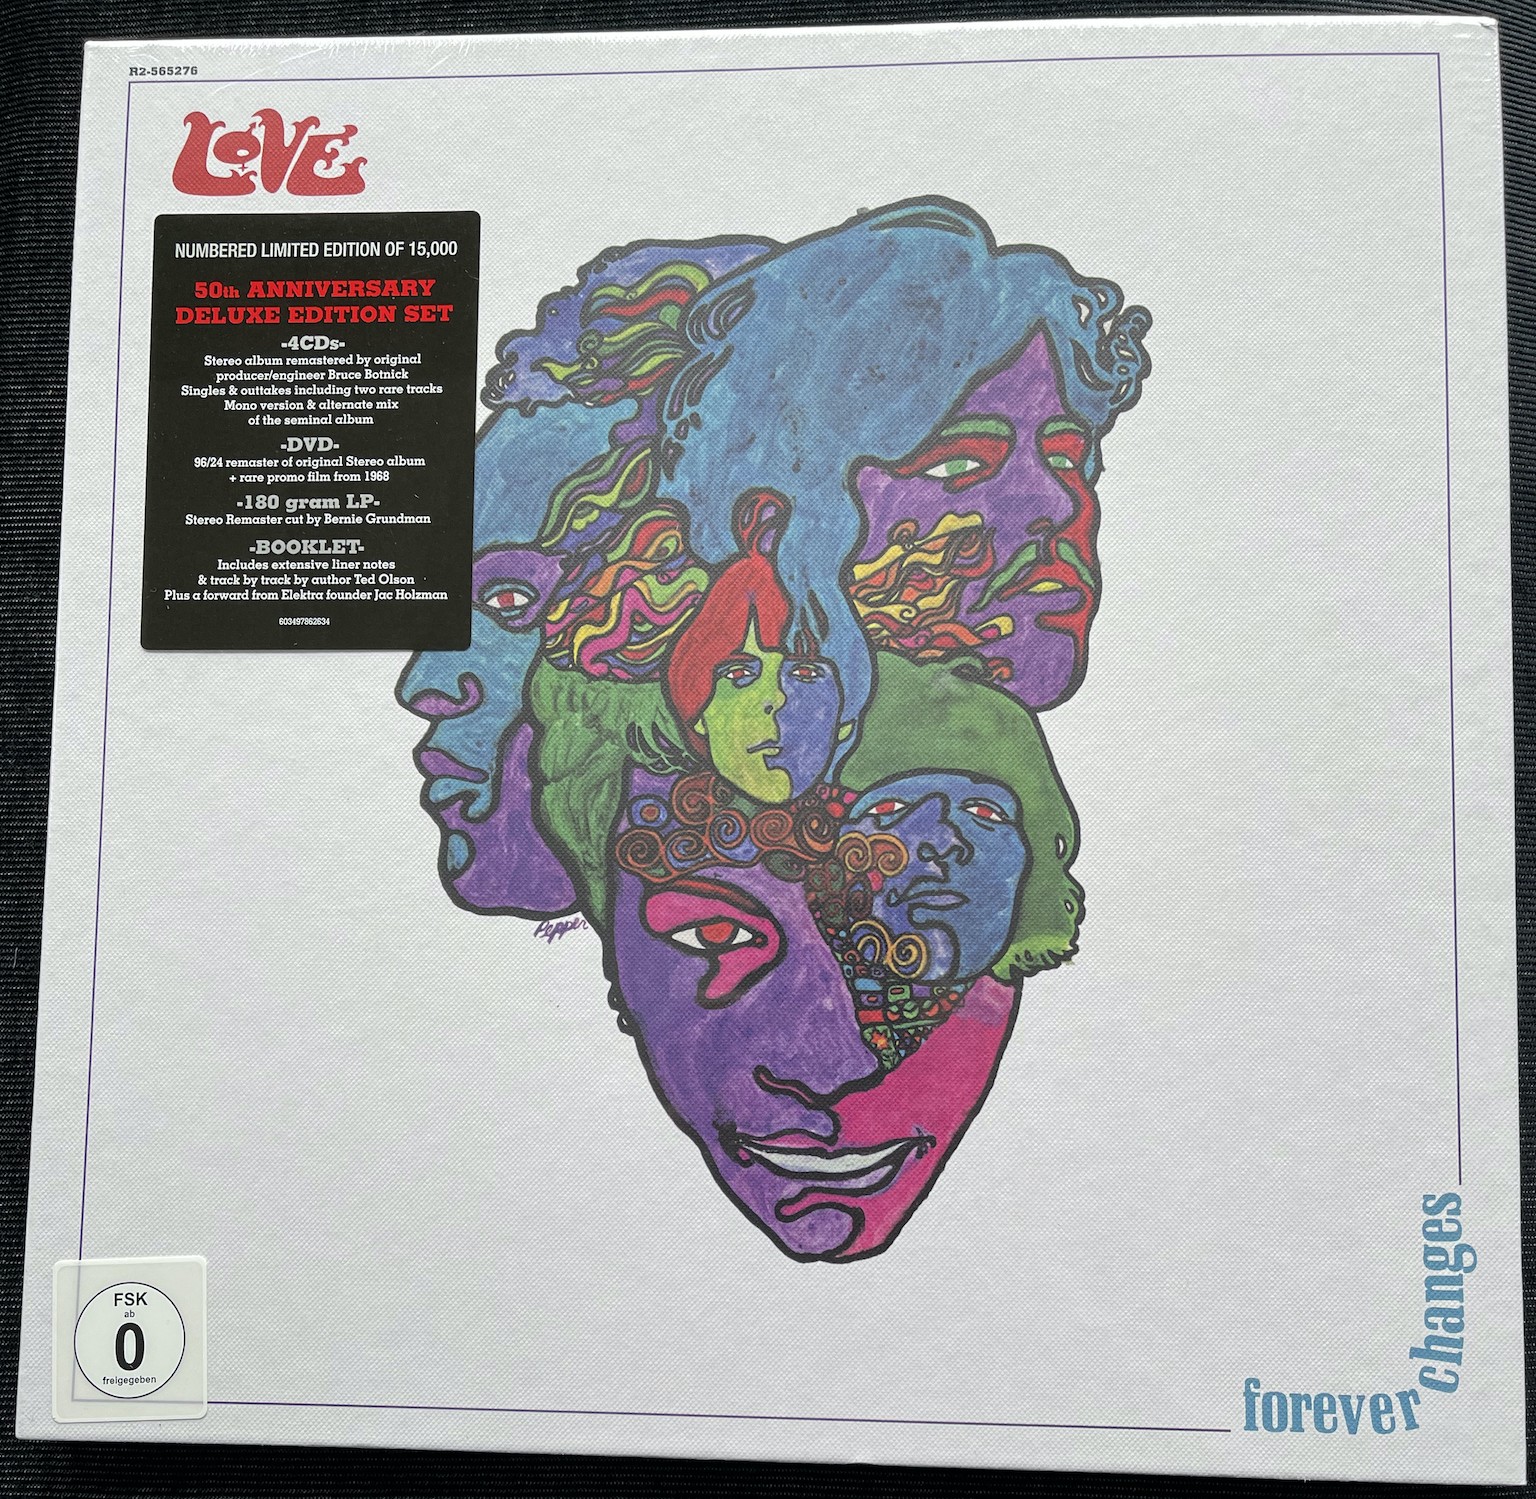 50th anniversary box set of the 1967 album "Forever Changes" by Love.